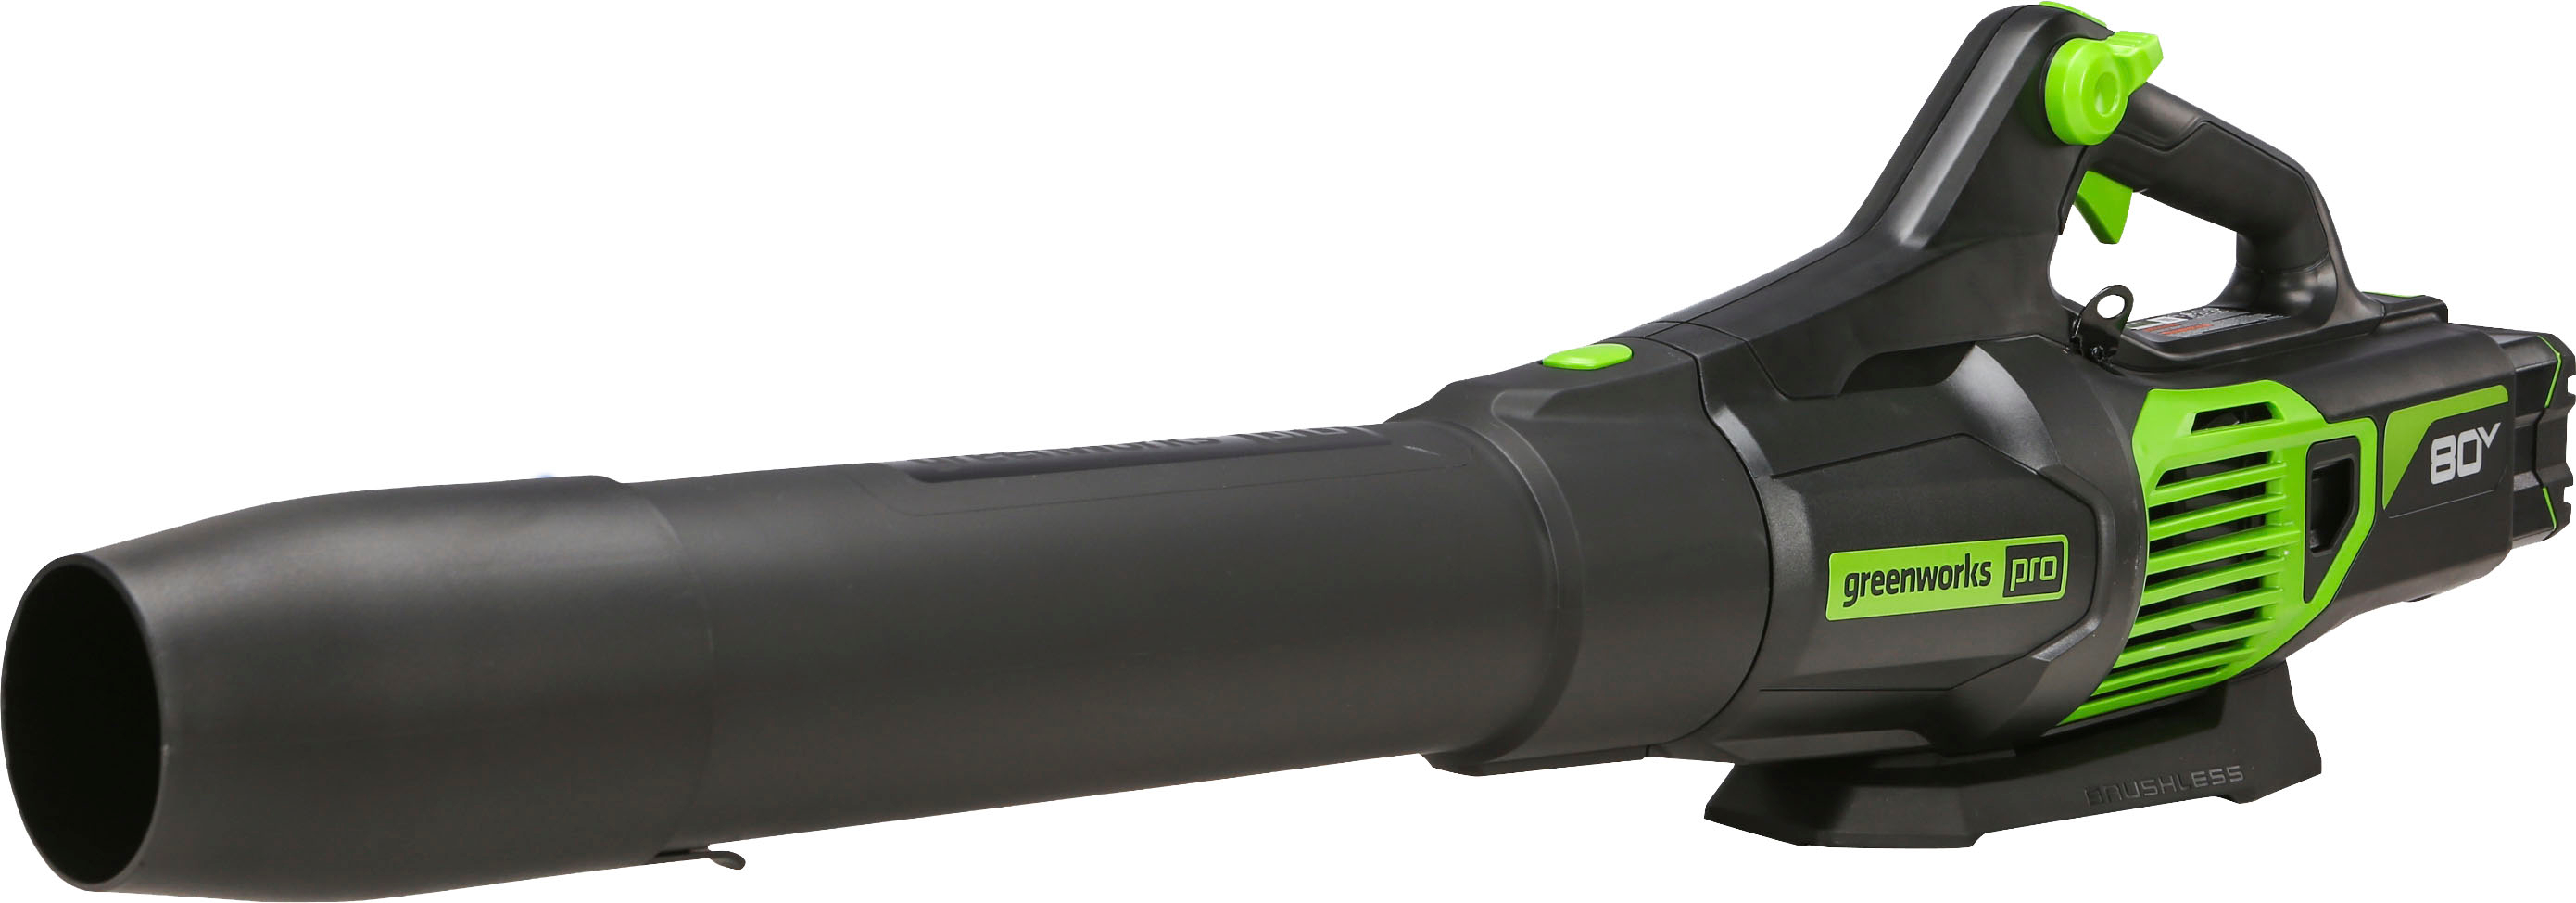 Angle View: Greenworks - 80-Volt 170 MPH 730 CFM Cordless Handheld Blower (1 x 2.5Ah Battery and 1 x Charger) - Green